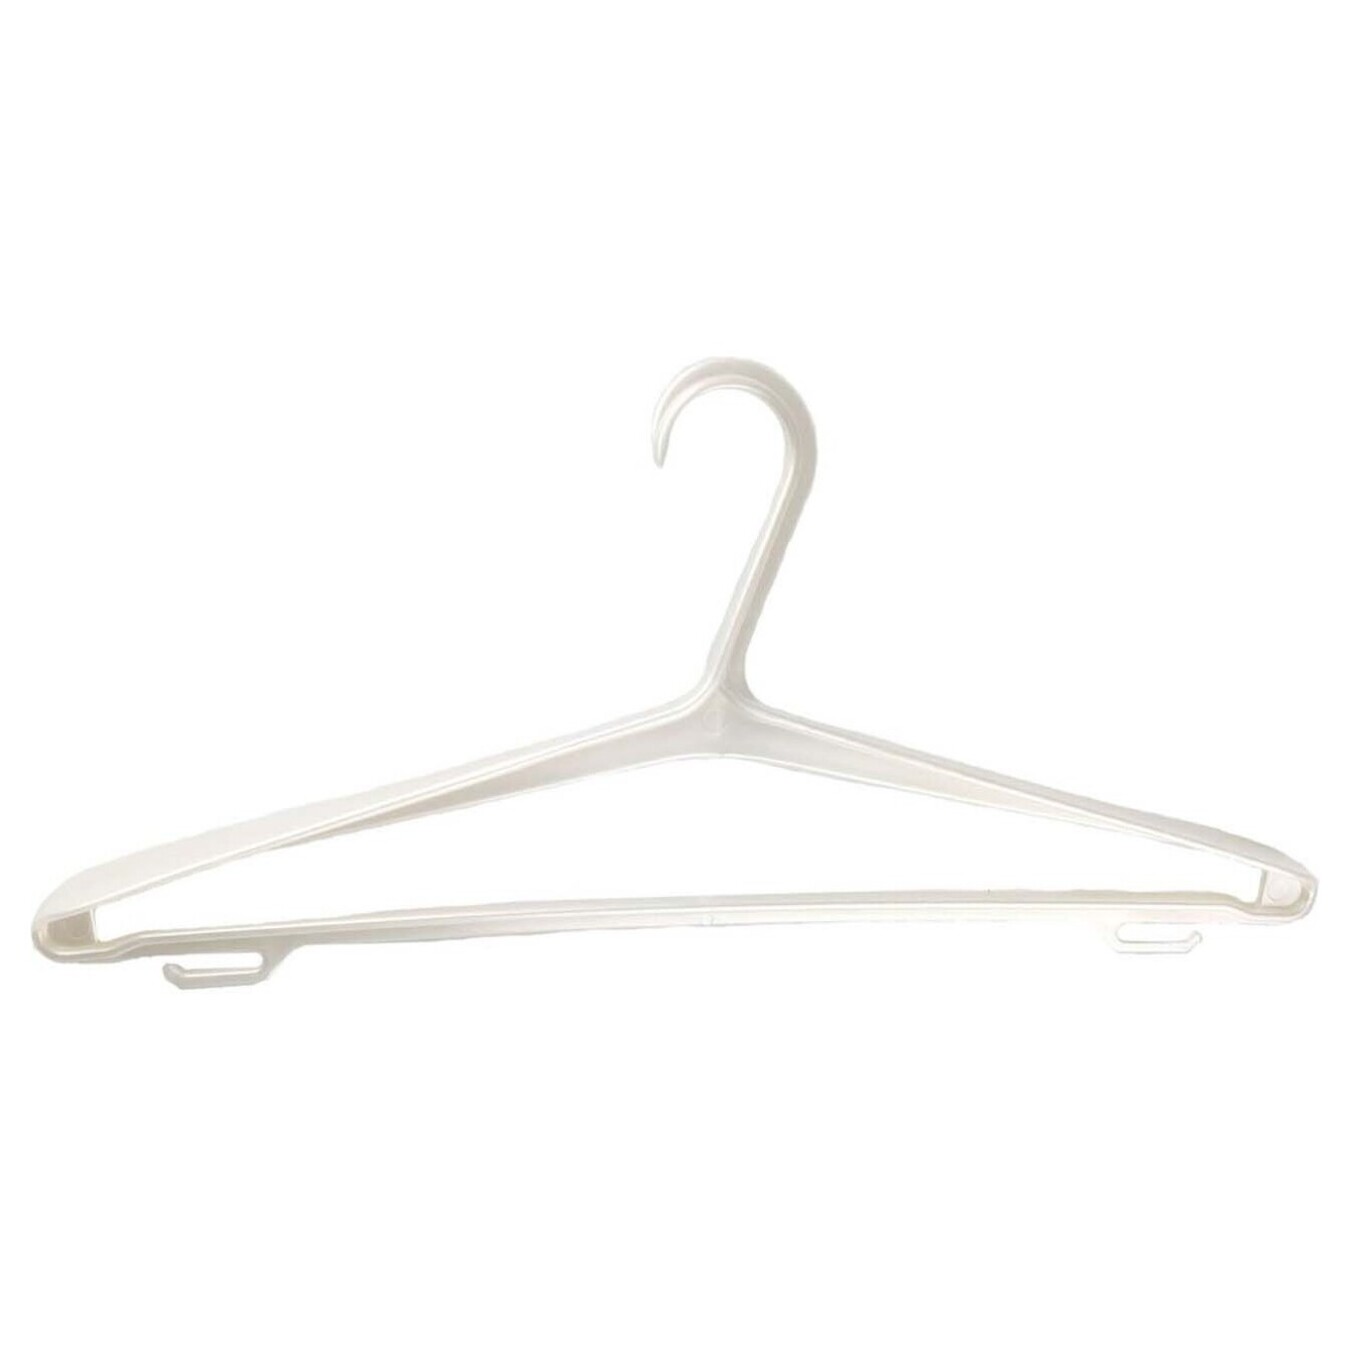 Hanger for mother-of-pearl clothes 42-44, 48-50 years.